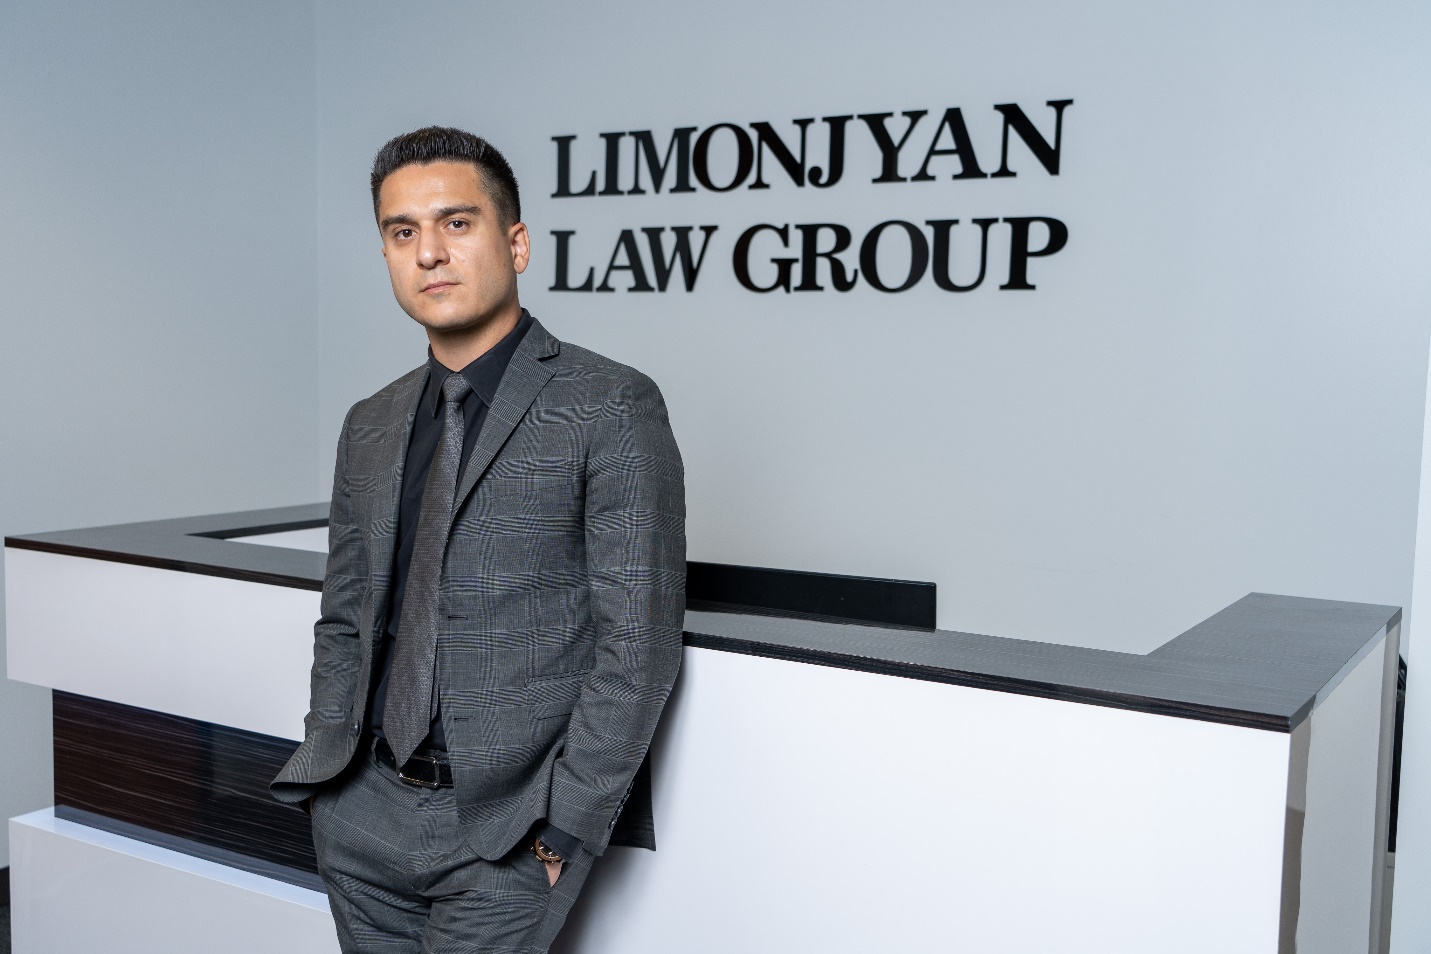 Limonjyan Law Group , Tuesday, August 16, 2022, Press release picture